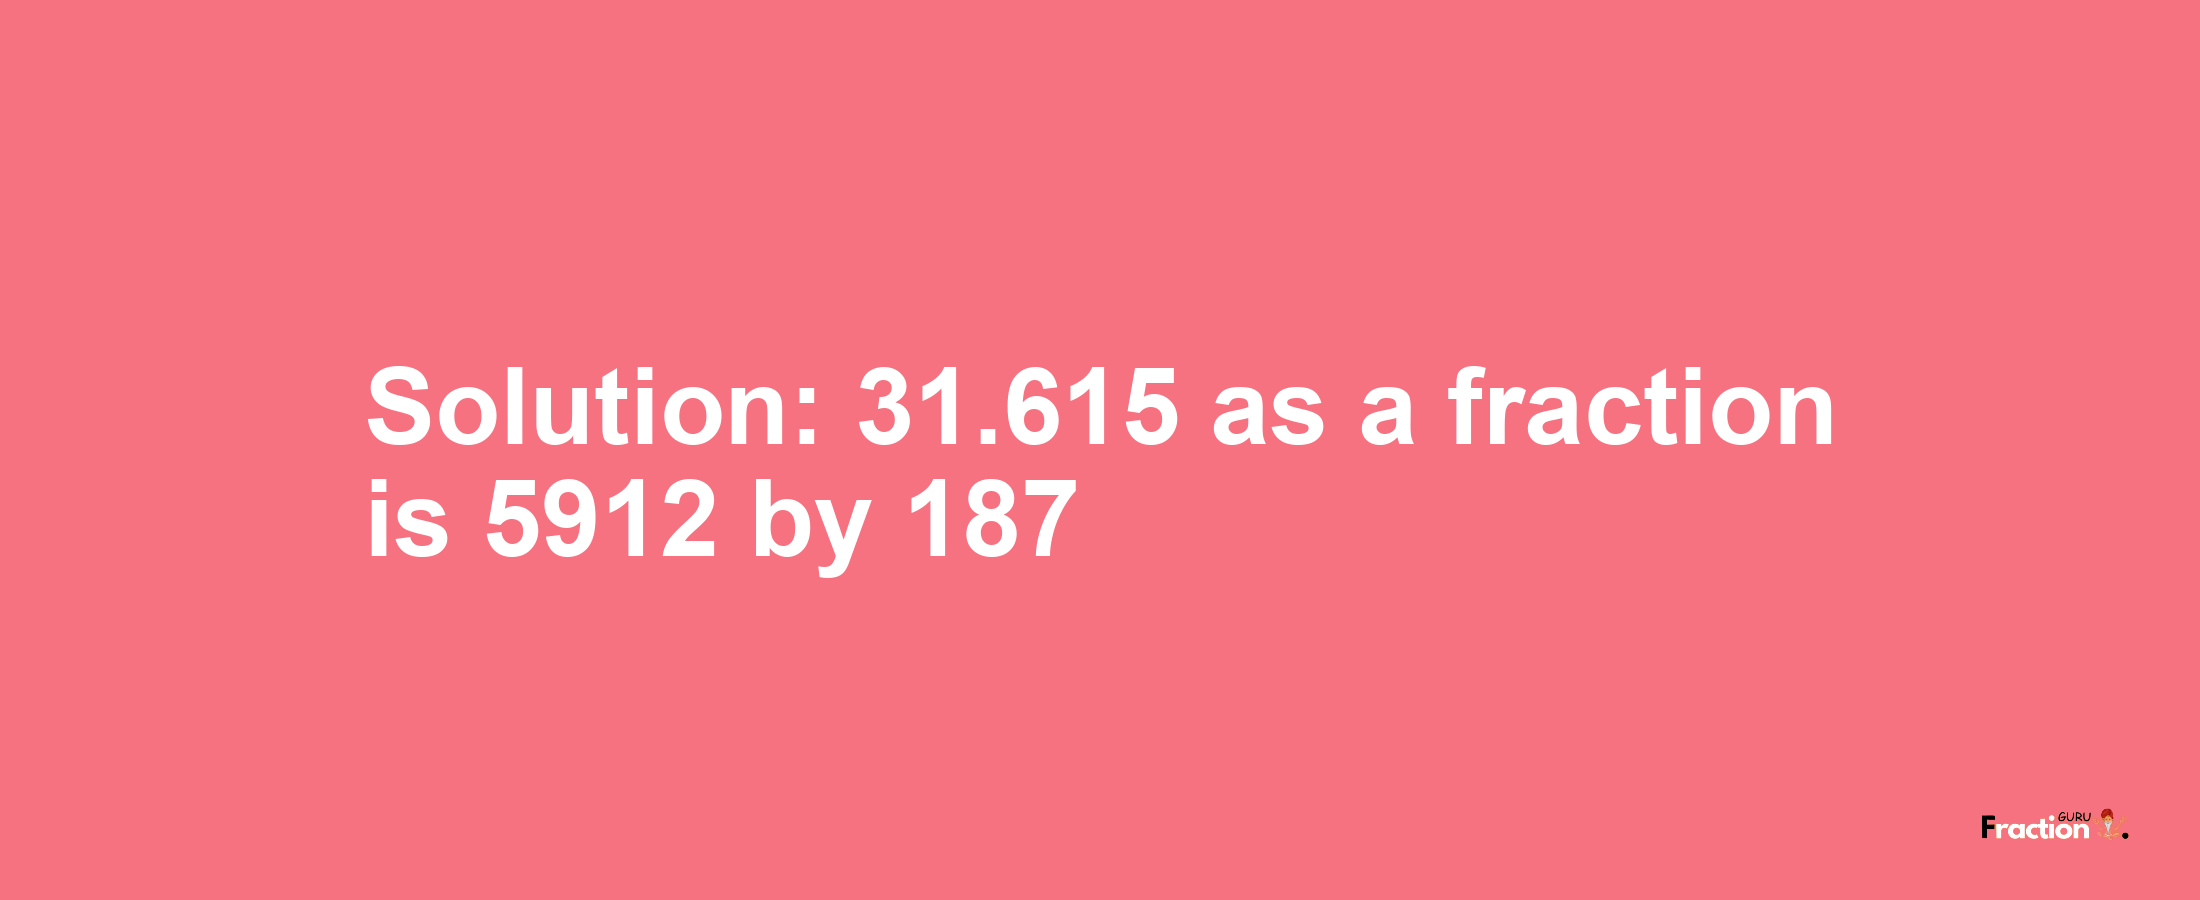 Solution:31.615 as a fraction is 5912/187